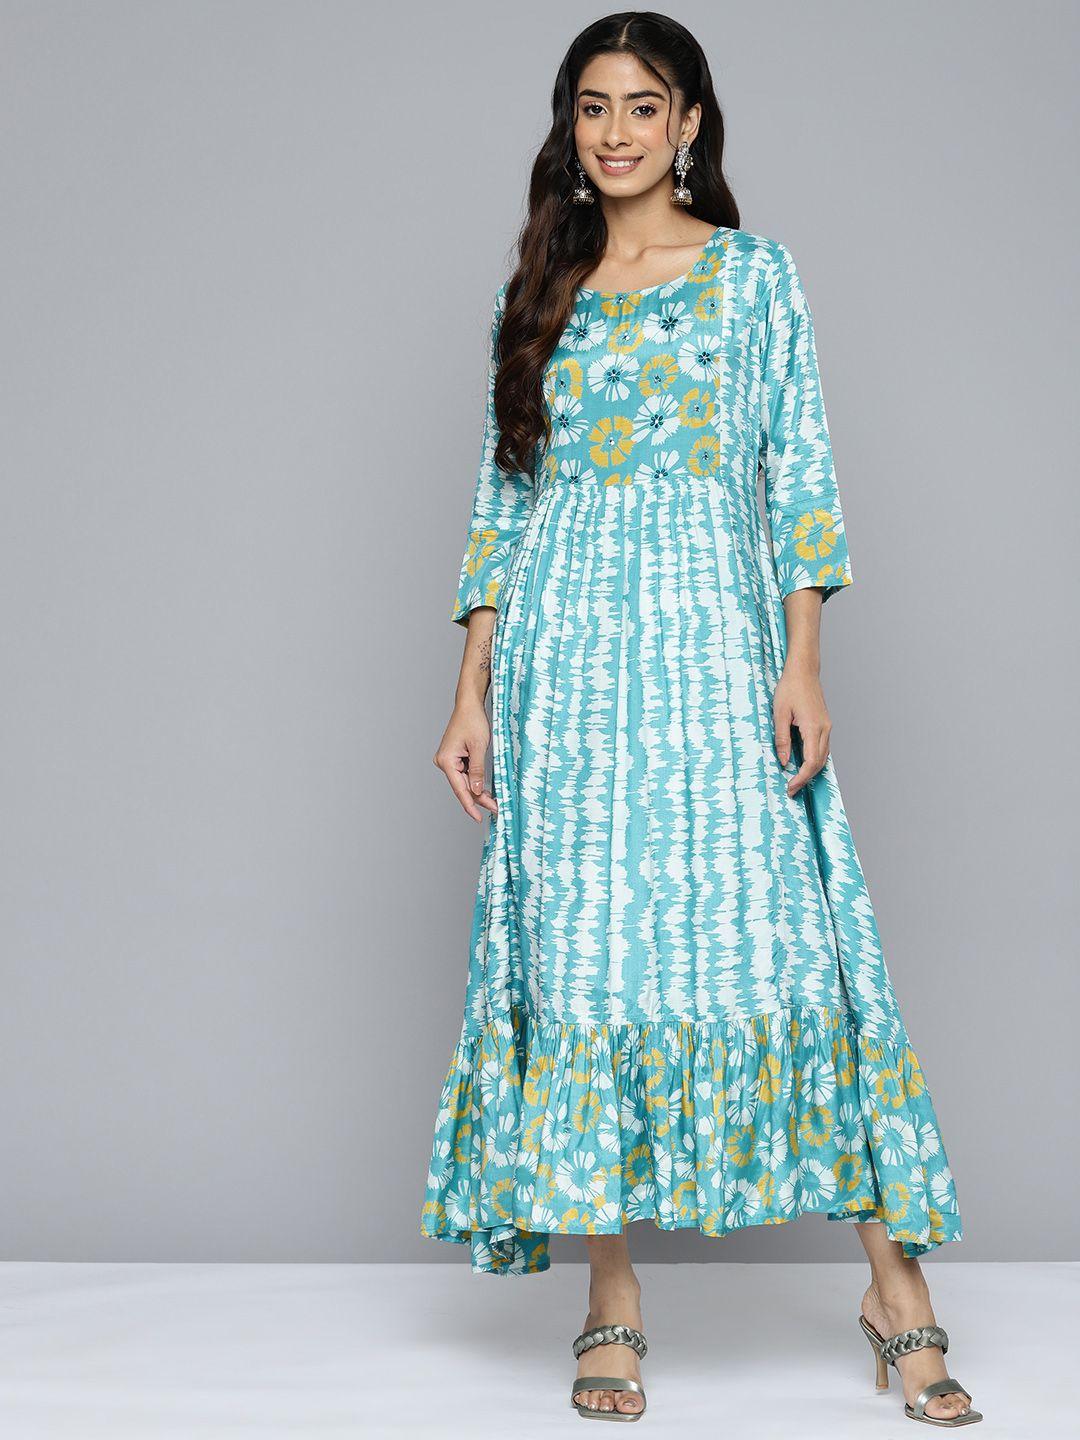 here&now-turquoise-blue-floral-print-a-line-maxi-dress